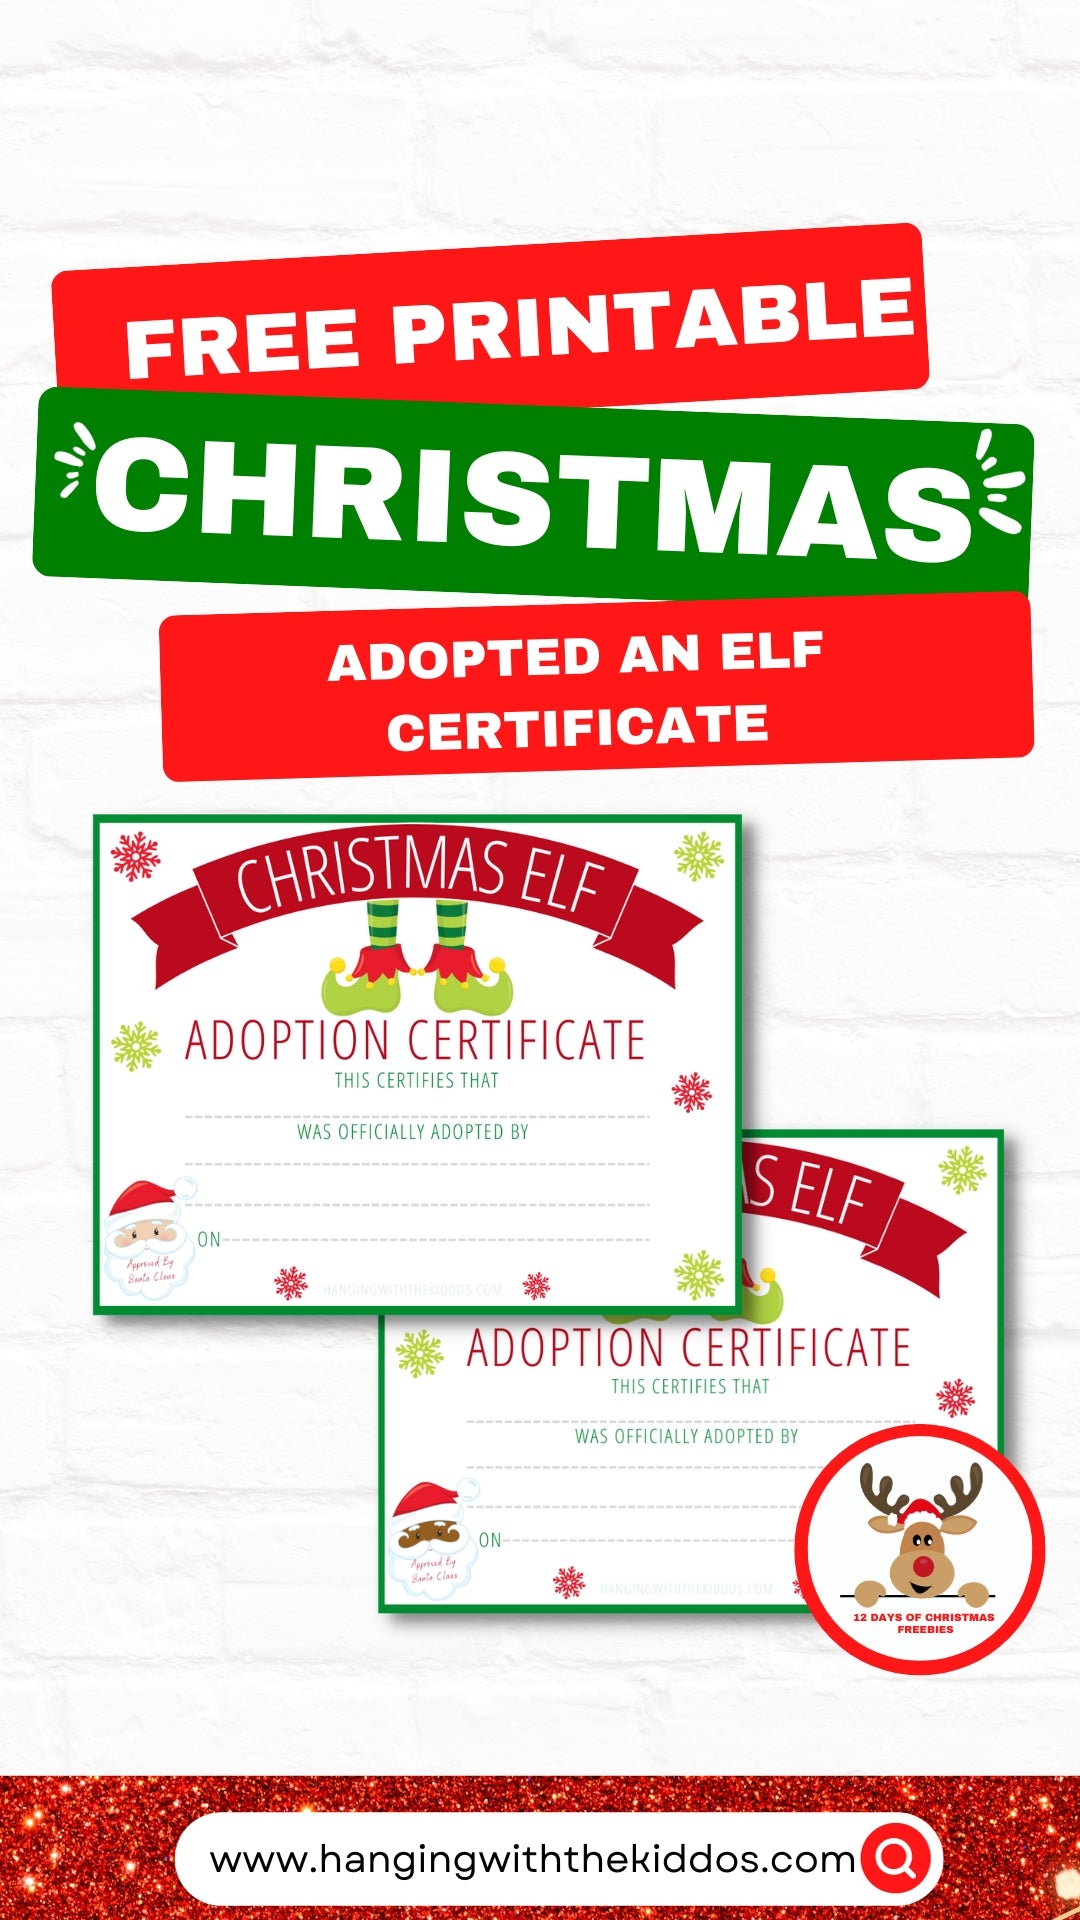 Adopted an Elf Certificate